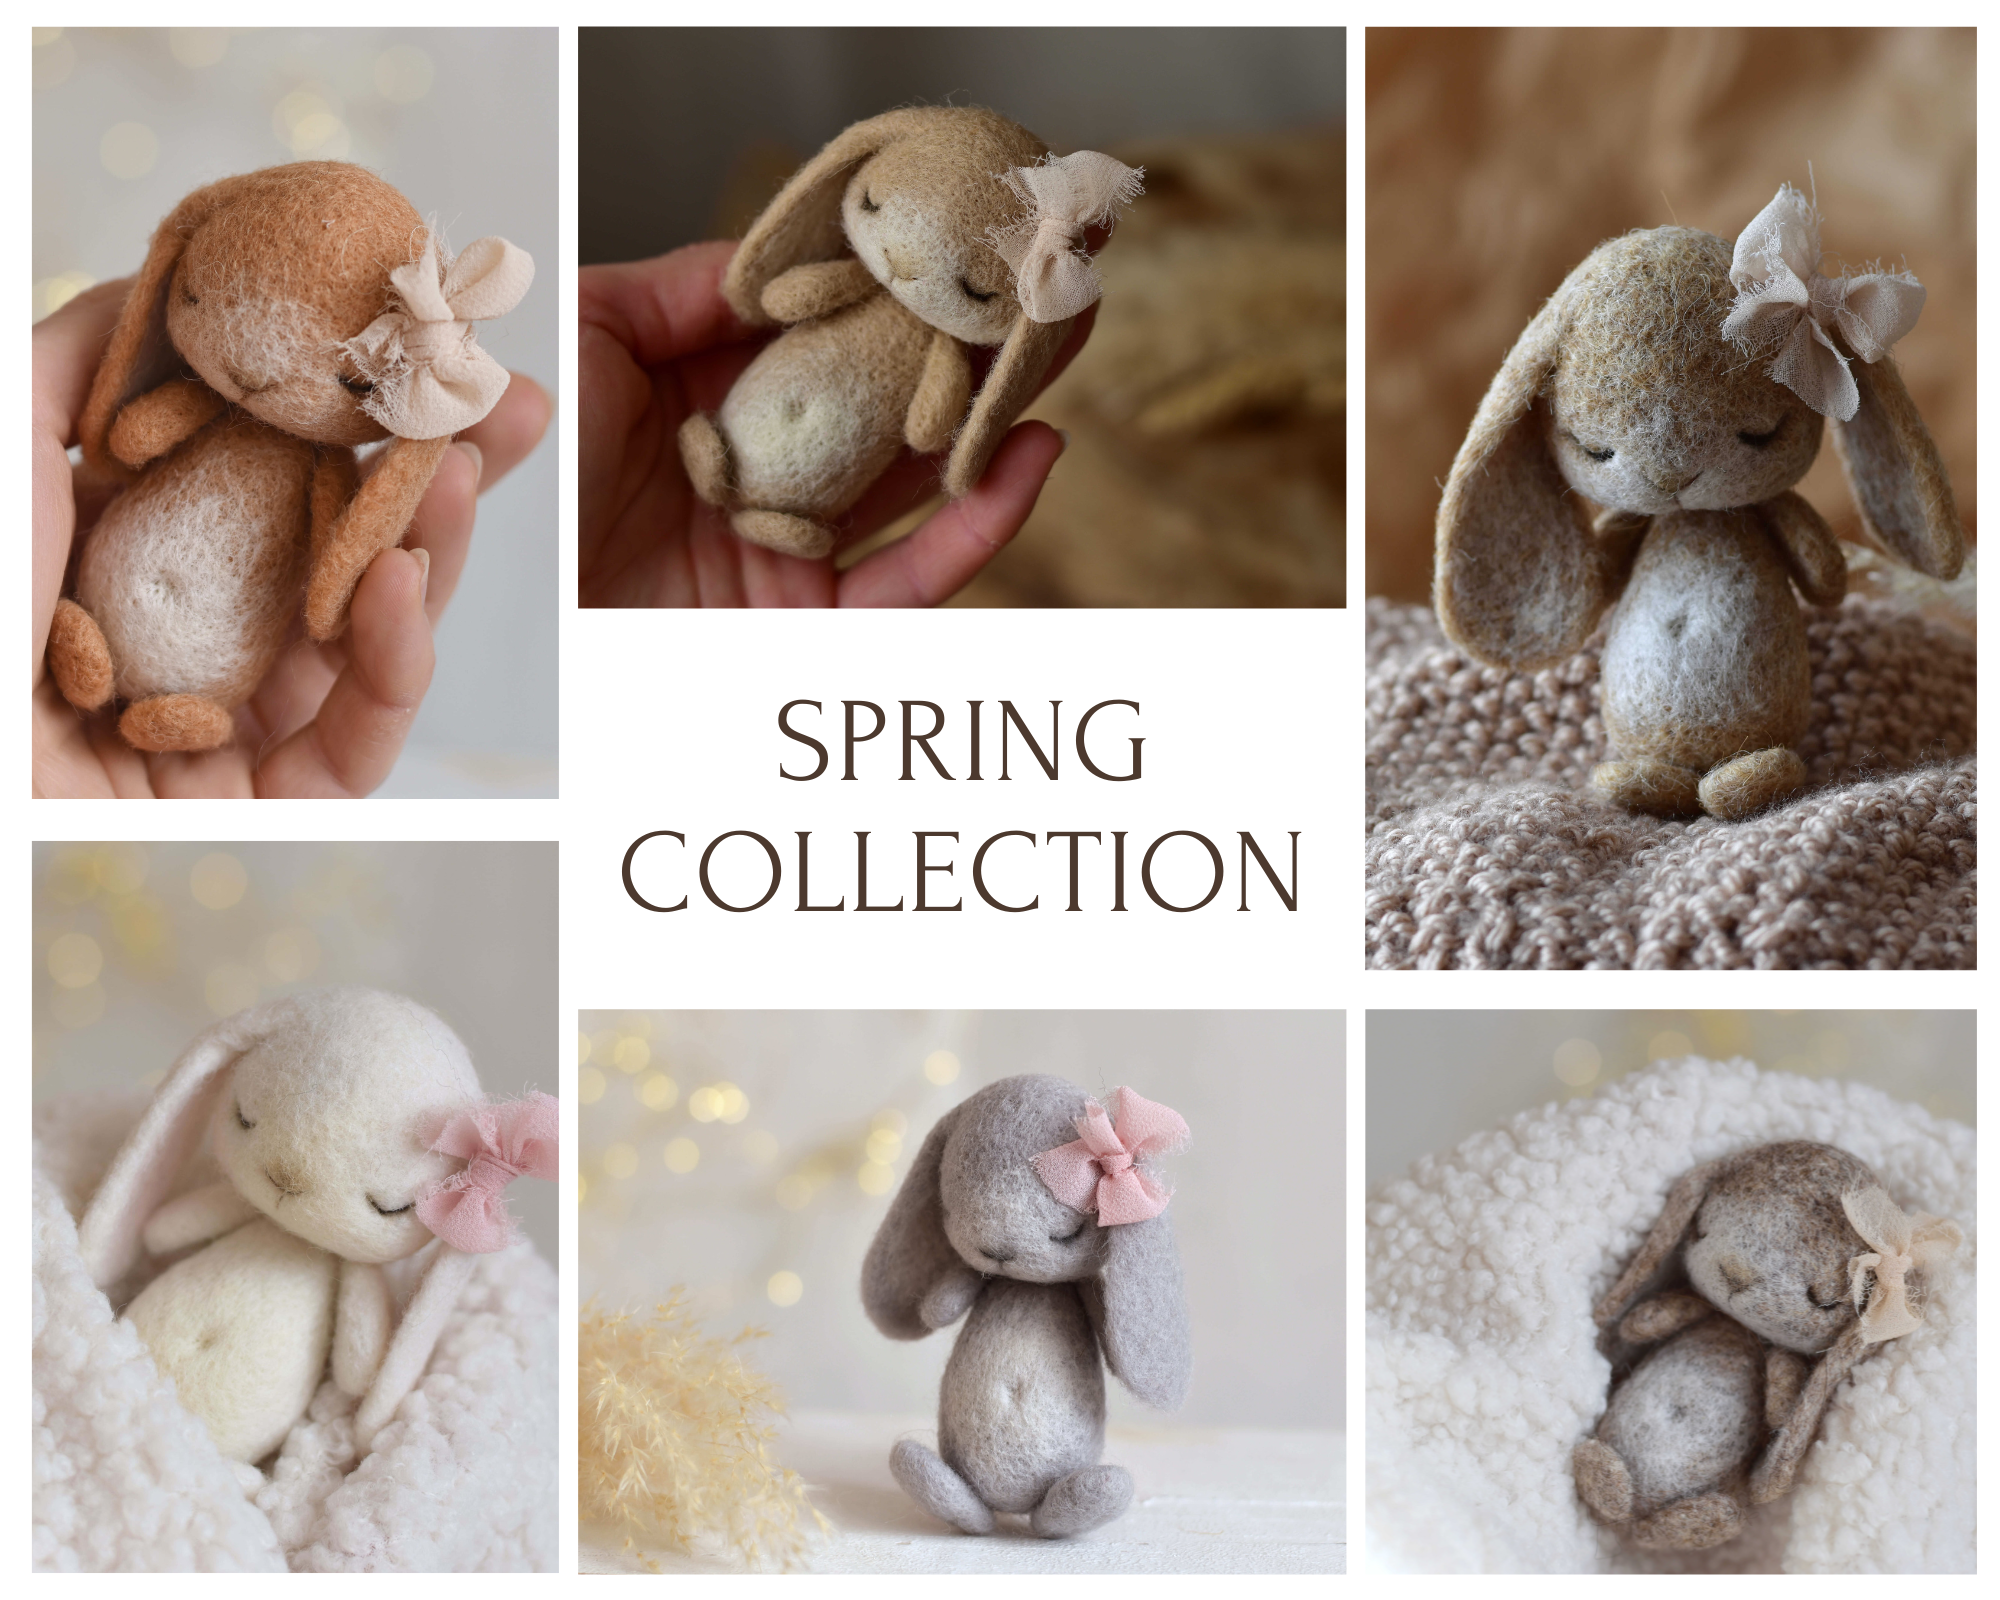 Felted photoprops newborn - LuckyBay Props